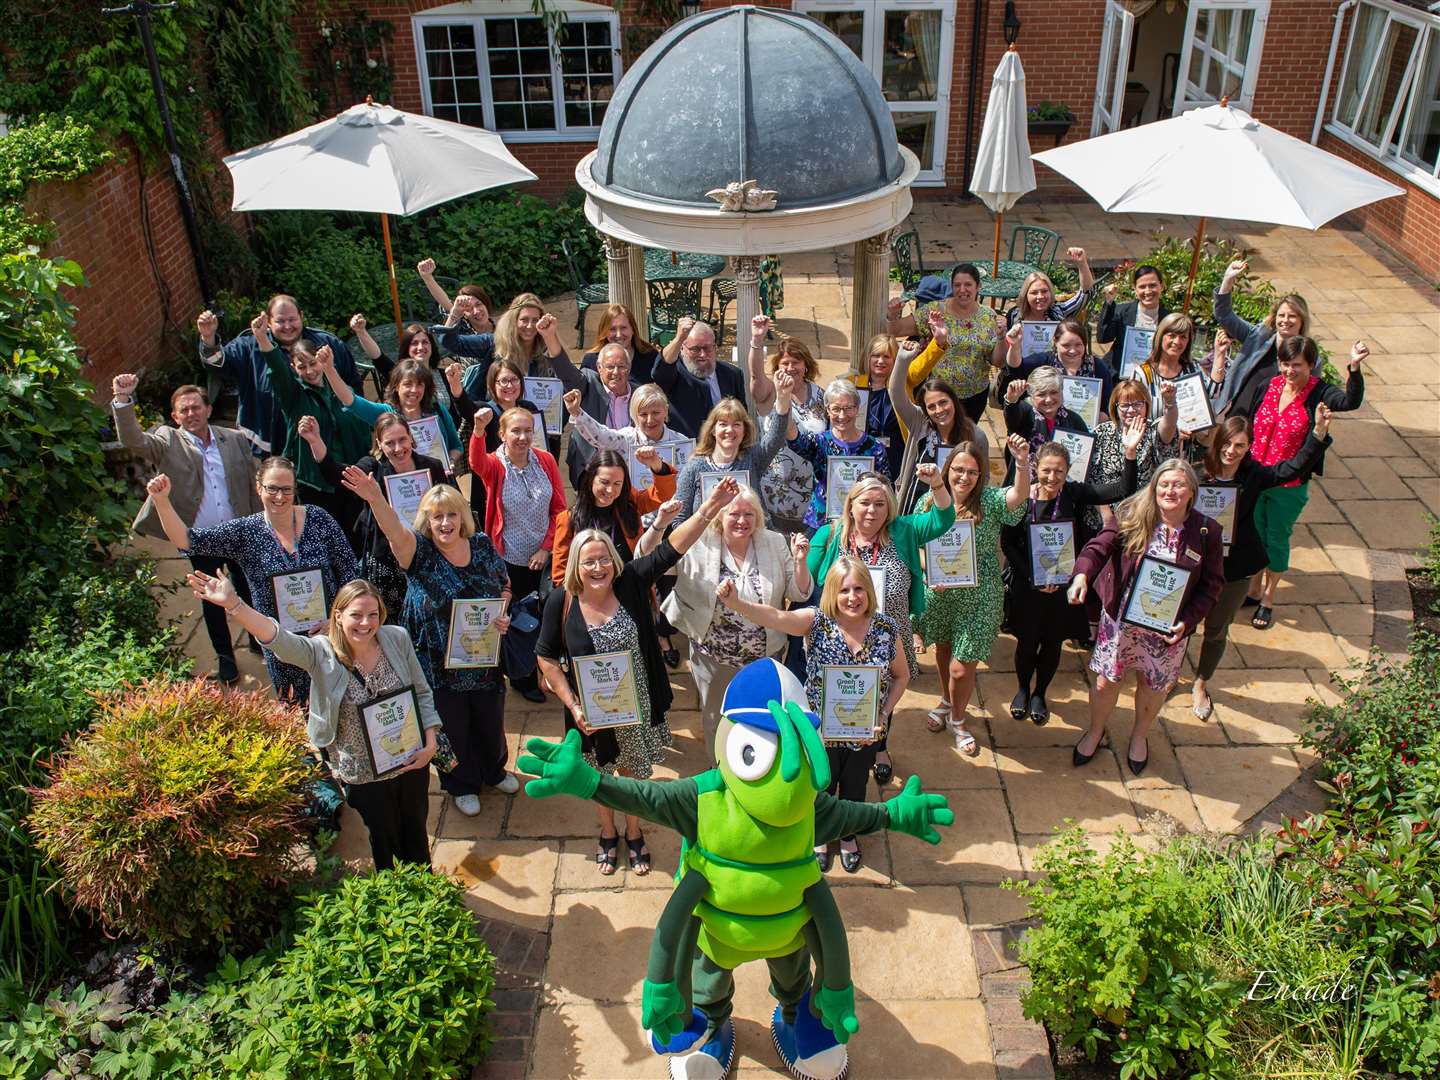 Green Travel Mark award winners with supporters and mascot Buster Bug at Hempstead house in Bapchild, near Sittingbourne. Photo: Encade.